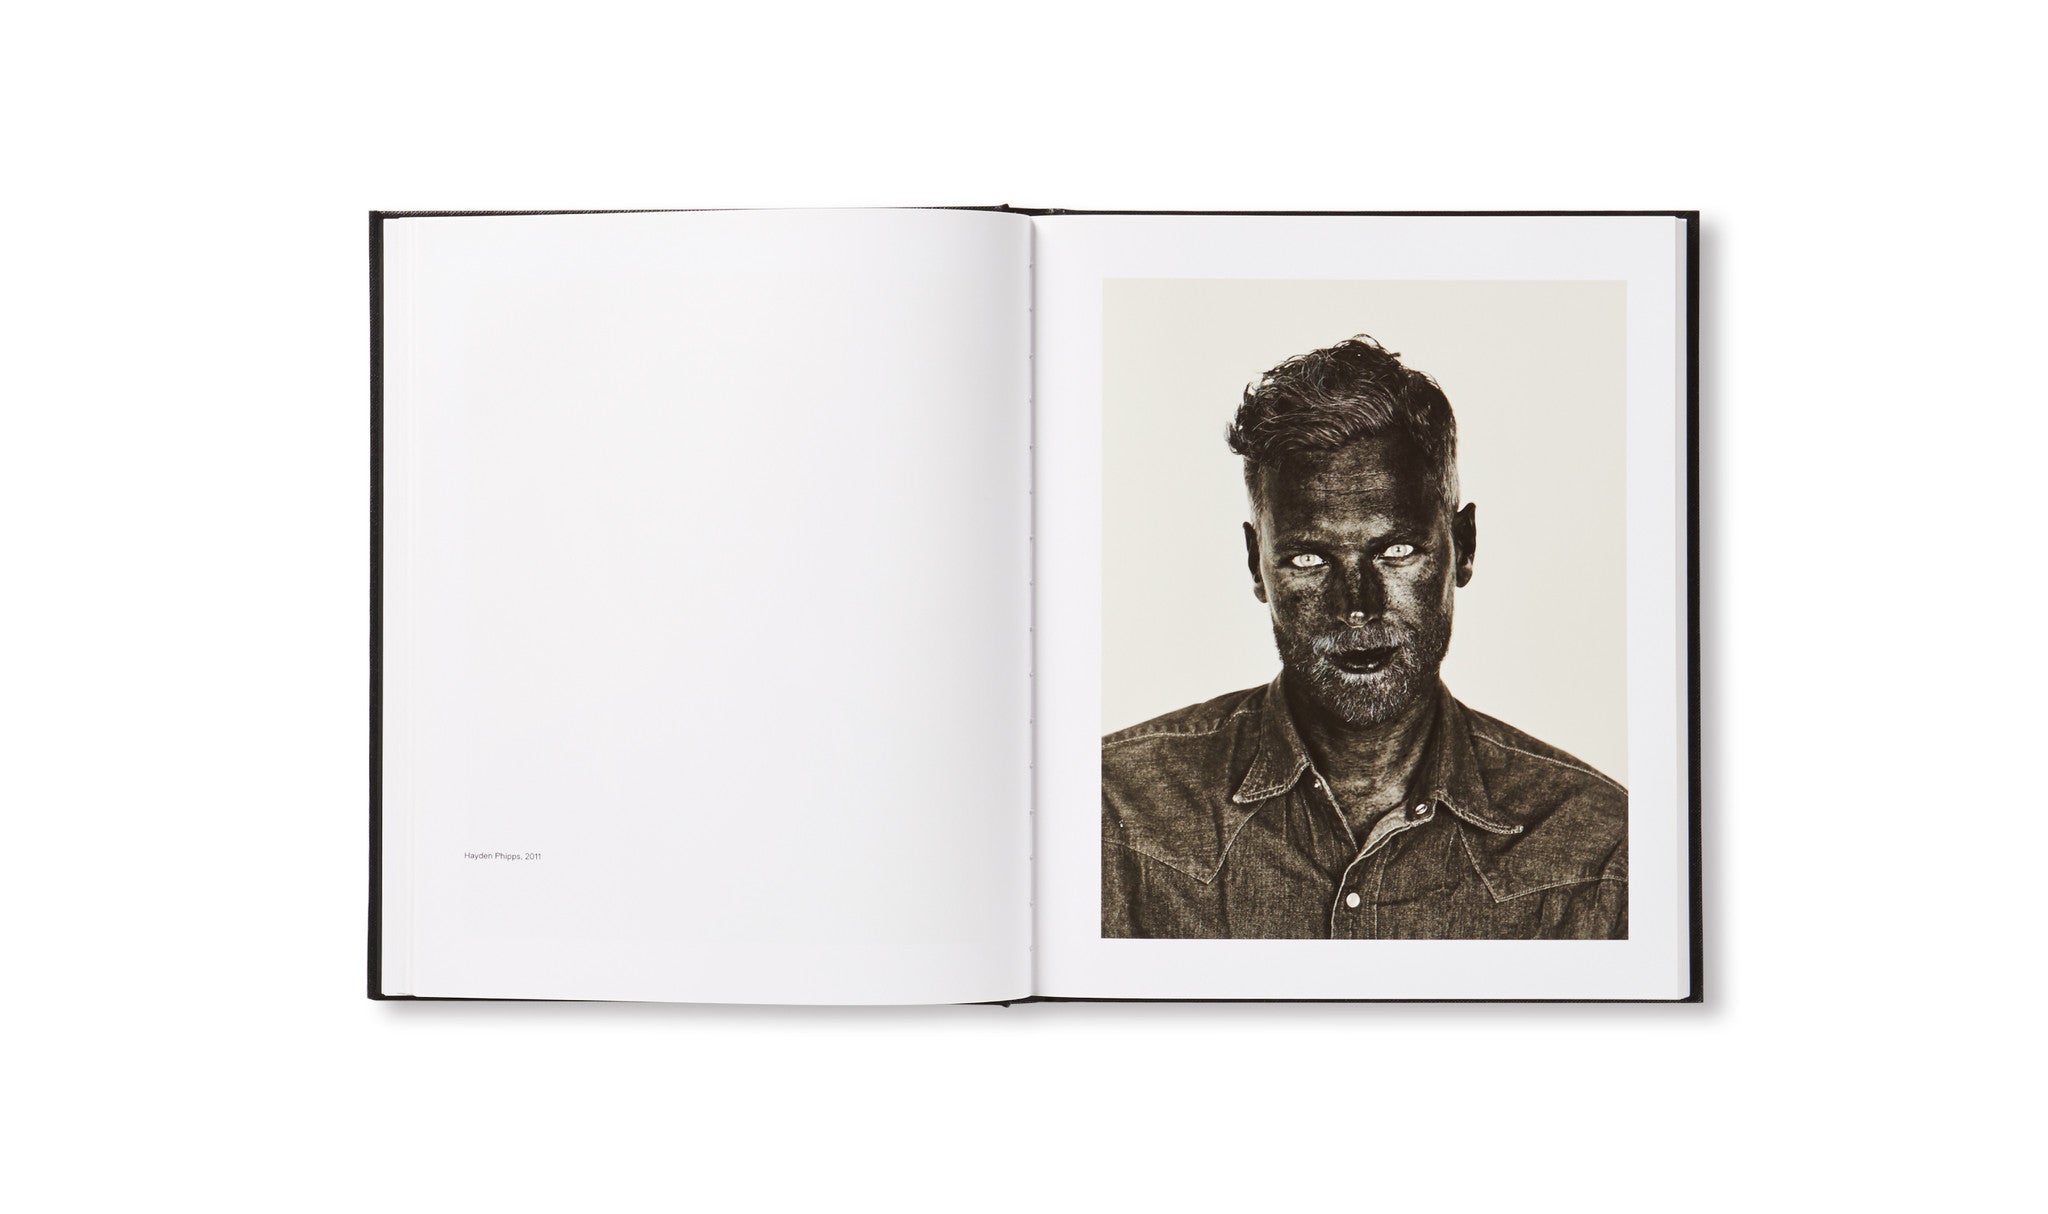 THERE'S A PLACE IN HELL FOR ME & MY FRIENDS by Pieter Hugo